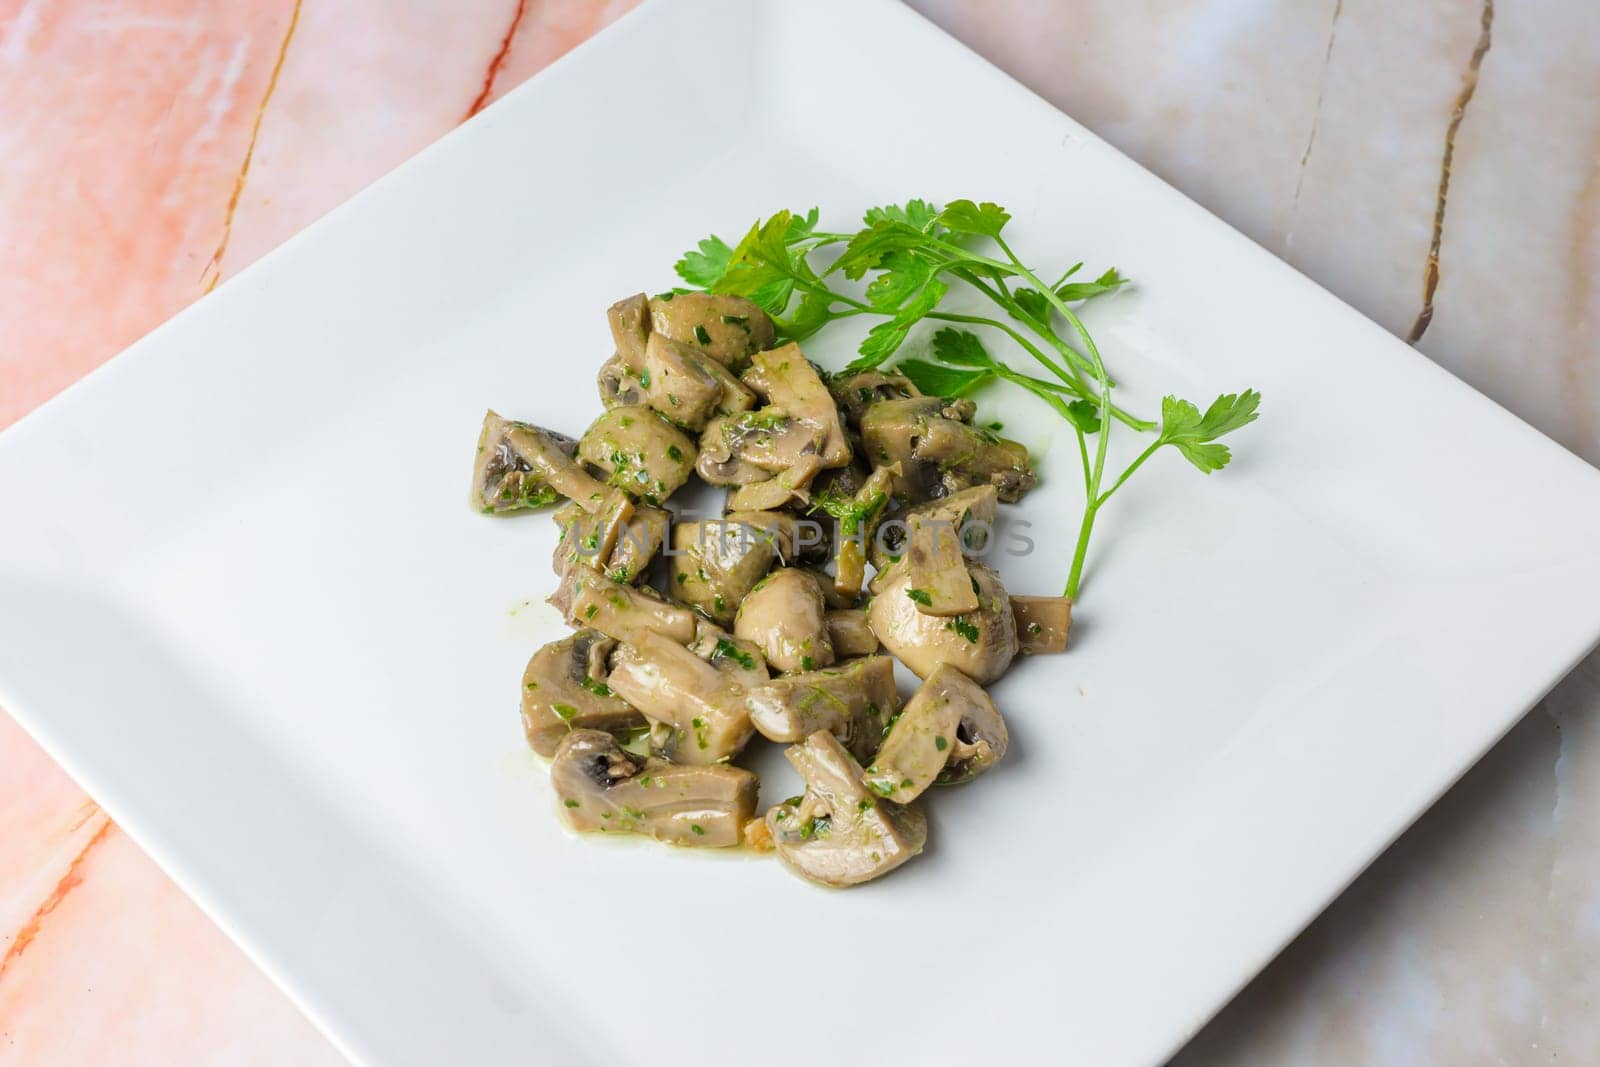 Herb-marinated mushrooms with parsley on a square white plate, typical food, typical mediterranean mallorcan cuisine typical from balearic islands mallorca, spain by carlosviv